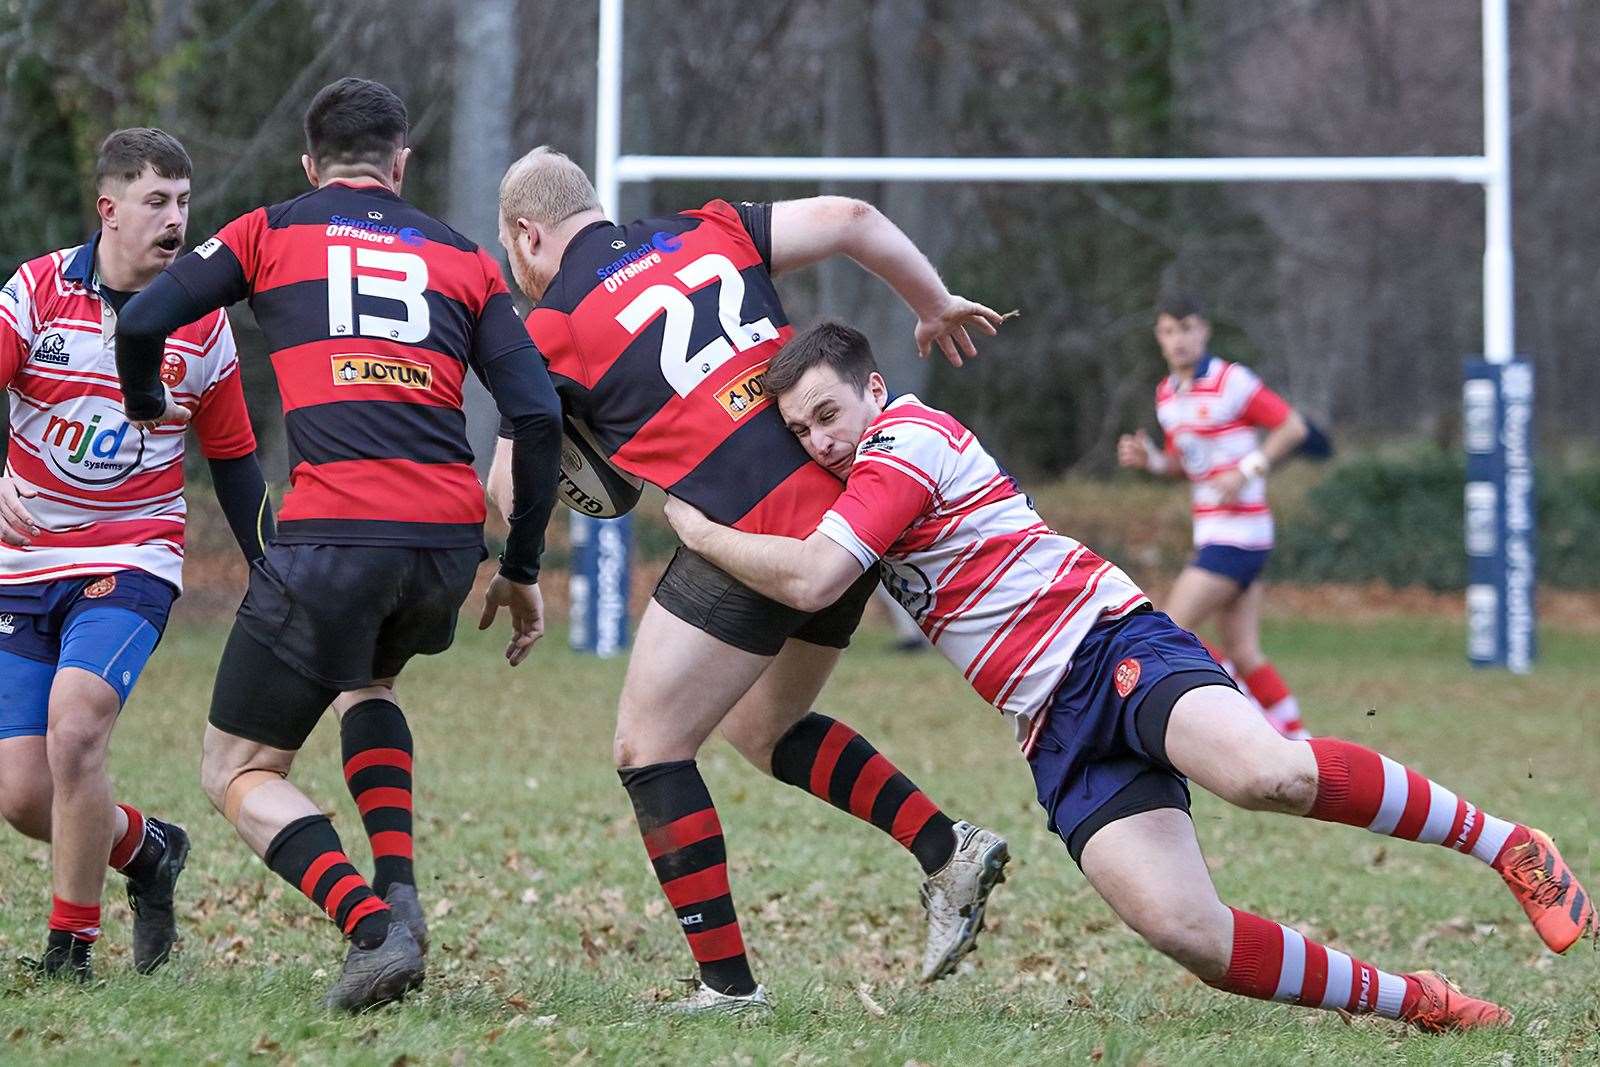 Ben Taylor makes tackle. Connor McWilliam in background. Picture: John MacGregor